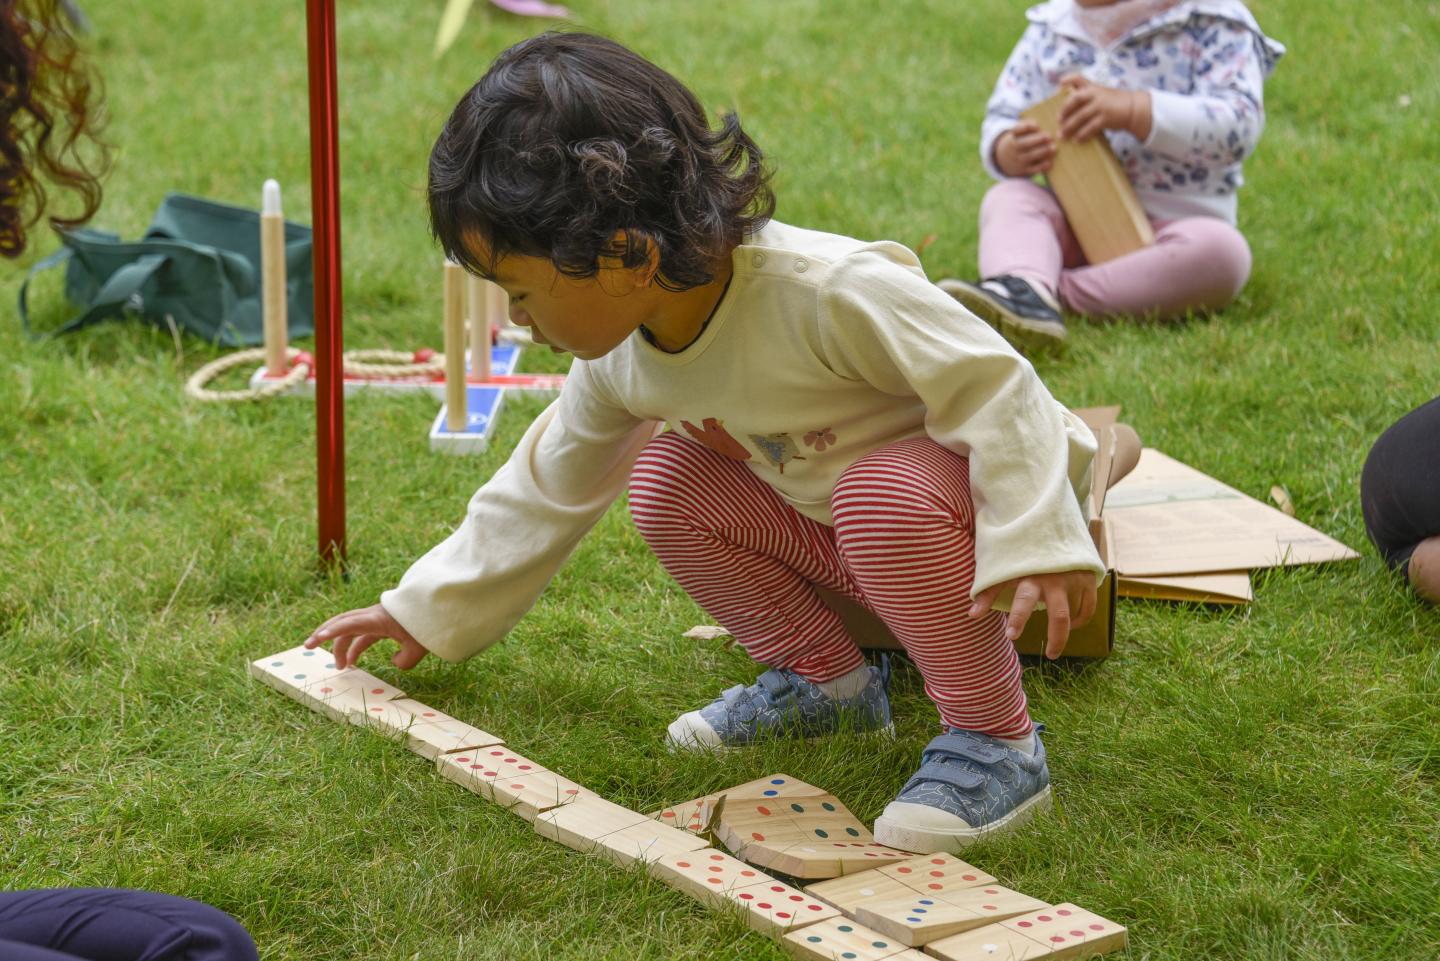 The image shows a young child playing with wooden dominoes.